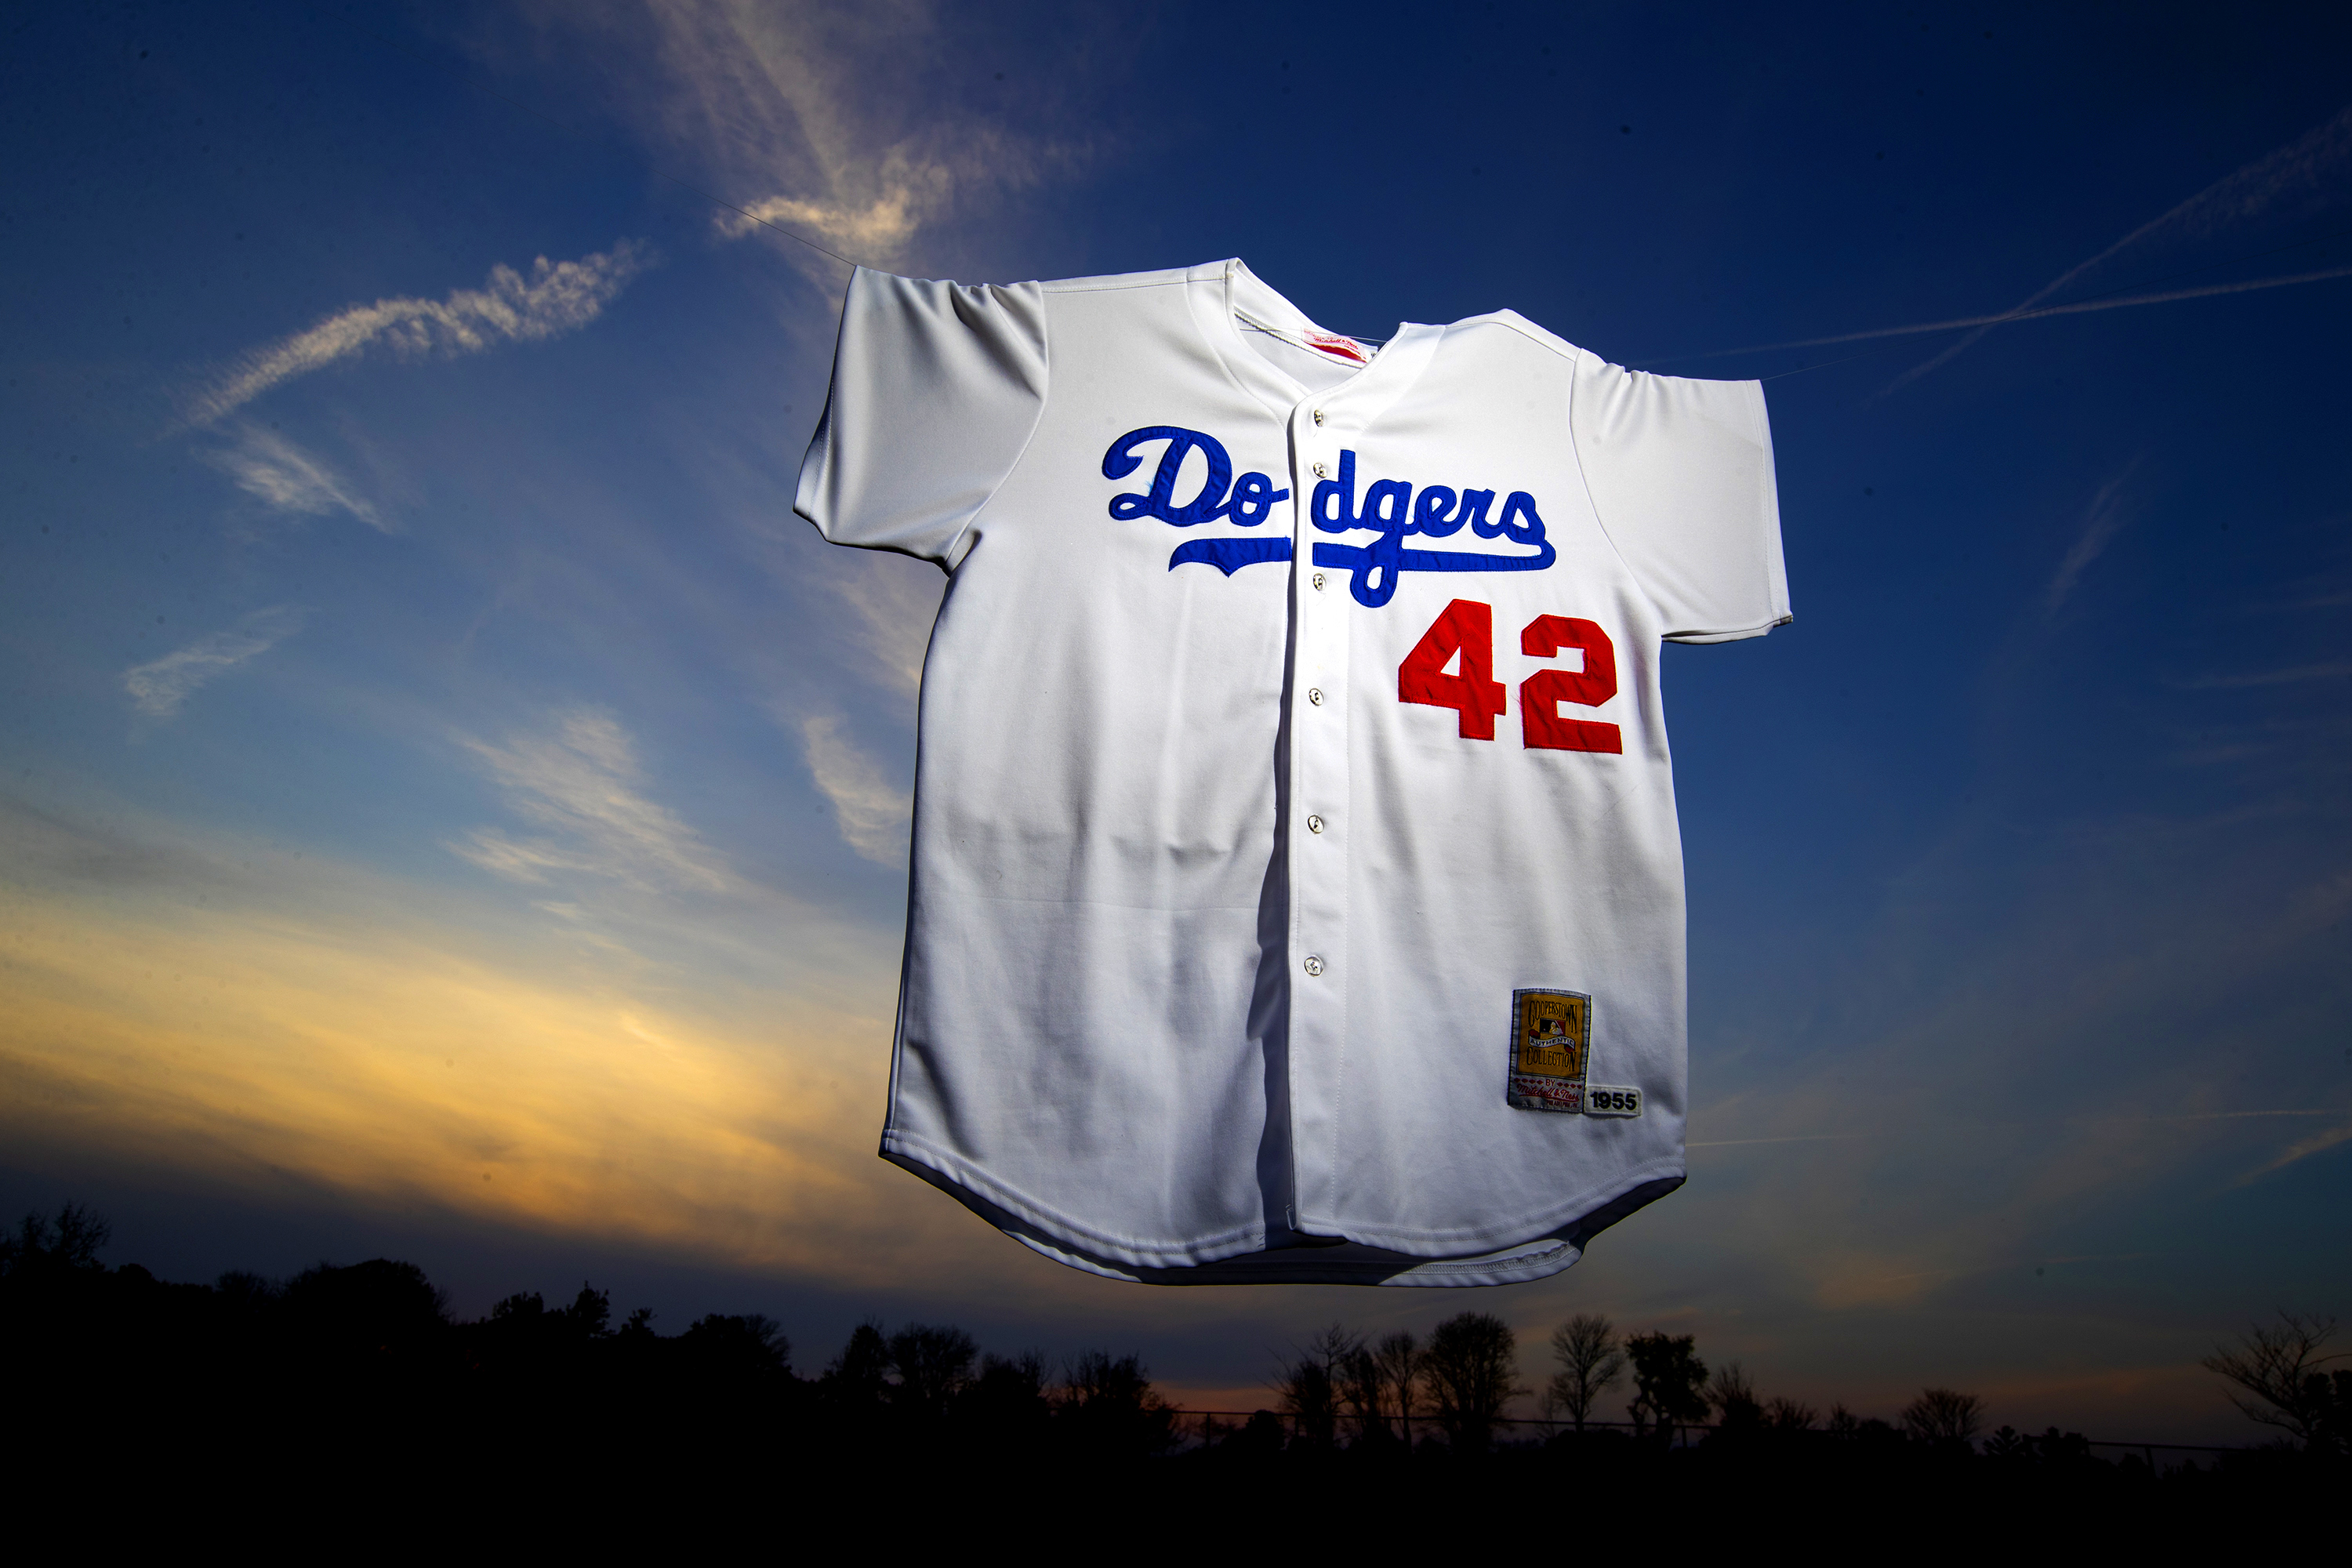 All of MLB to wear Jackie Robinson's No. 42 in Dodger Blue on